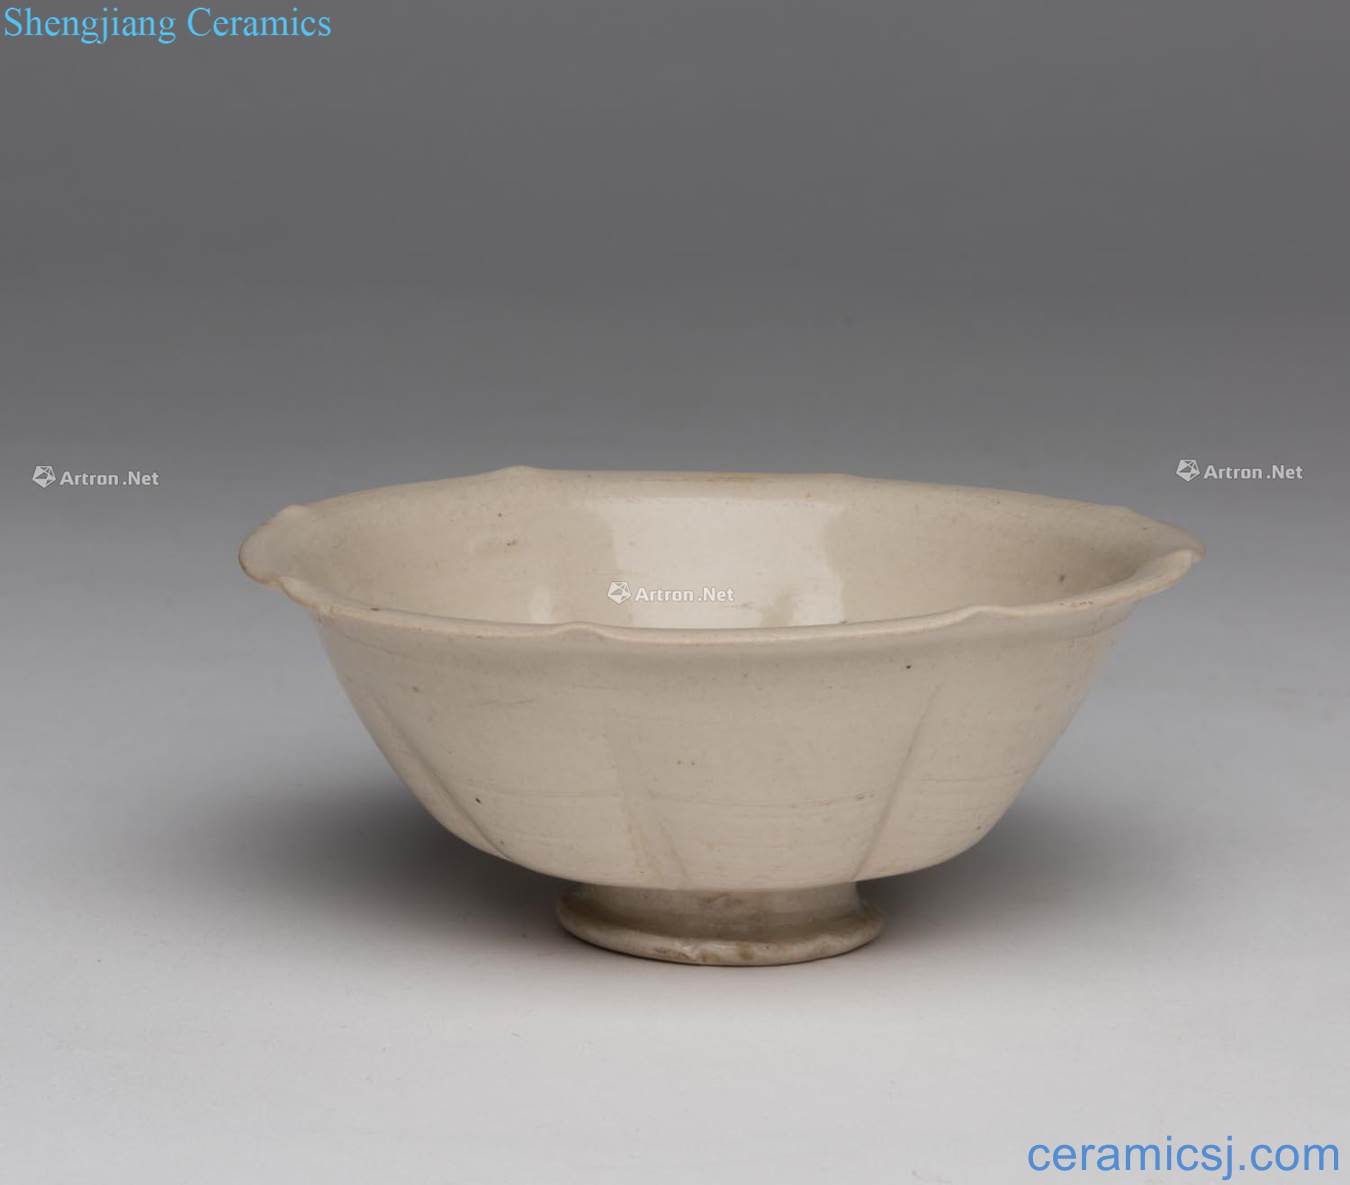 Gold (1115 ~ 1234) in northern China porcelain mouth bowl